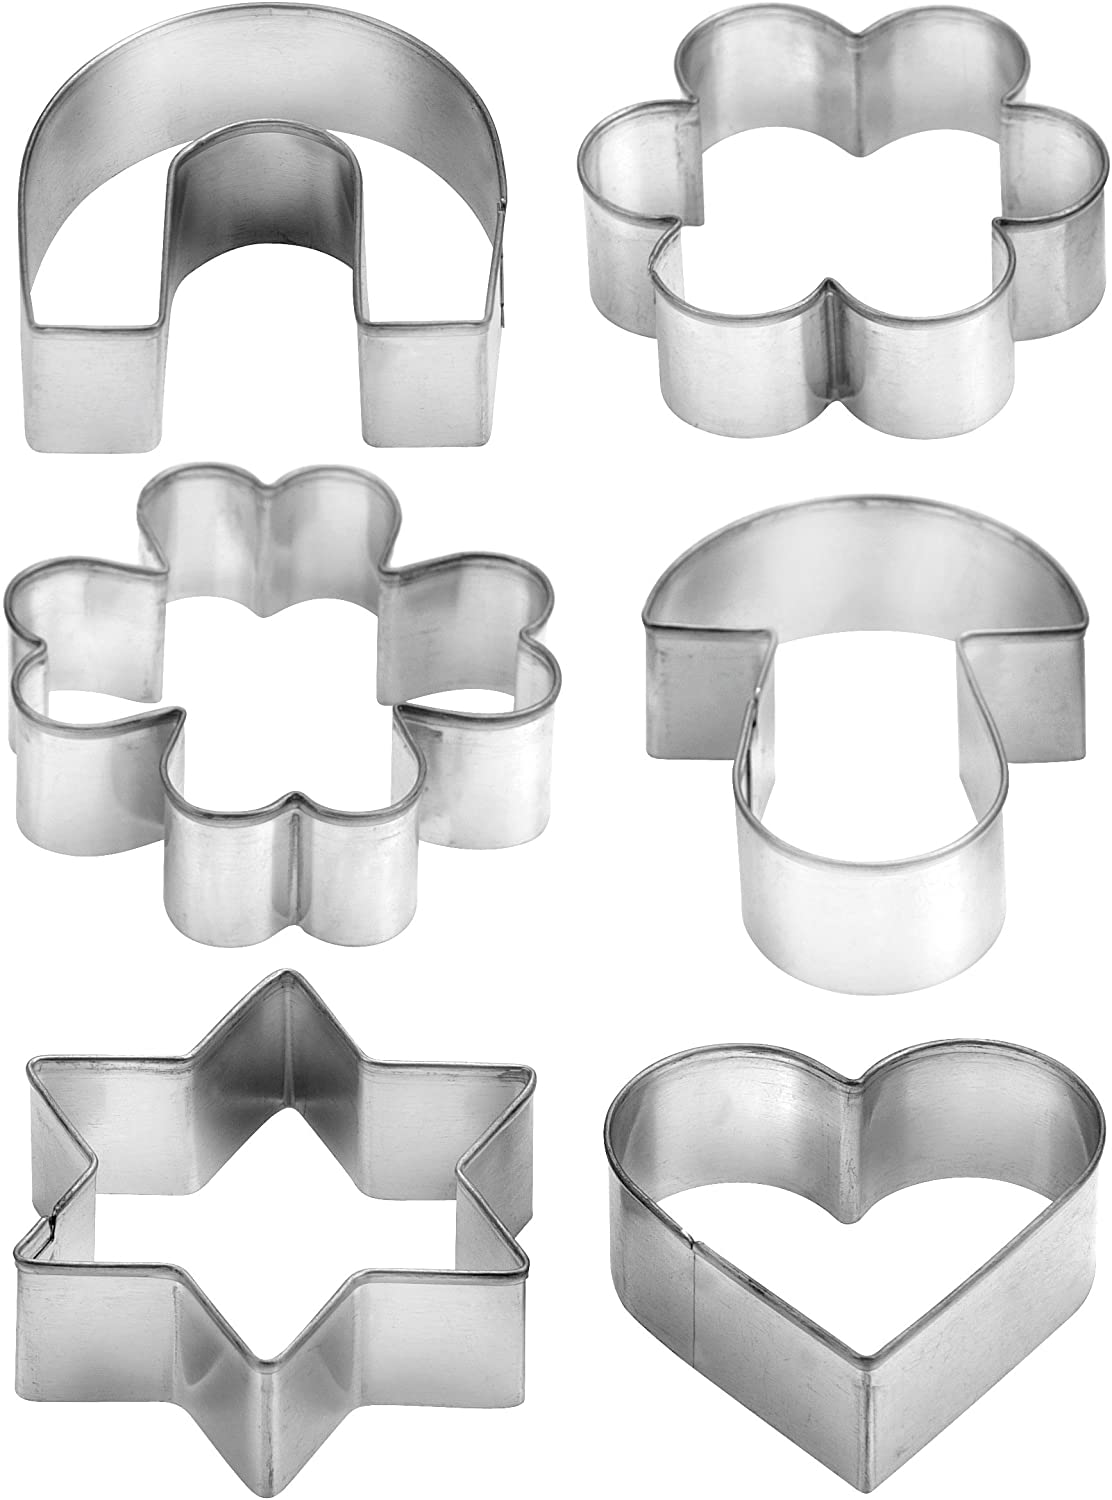 Tescoma Cookie Cutters in Ring Delicia, 6 Pieces